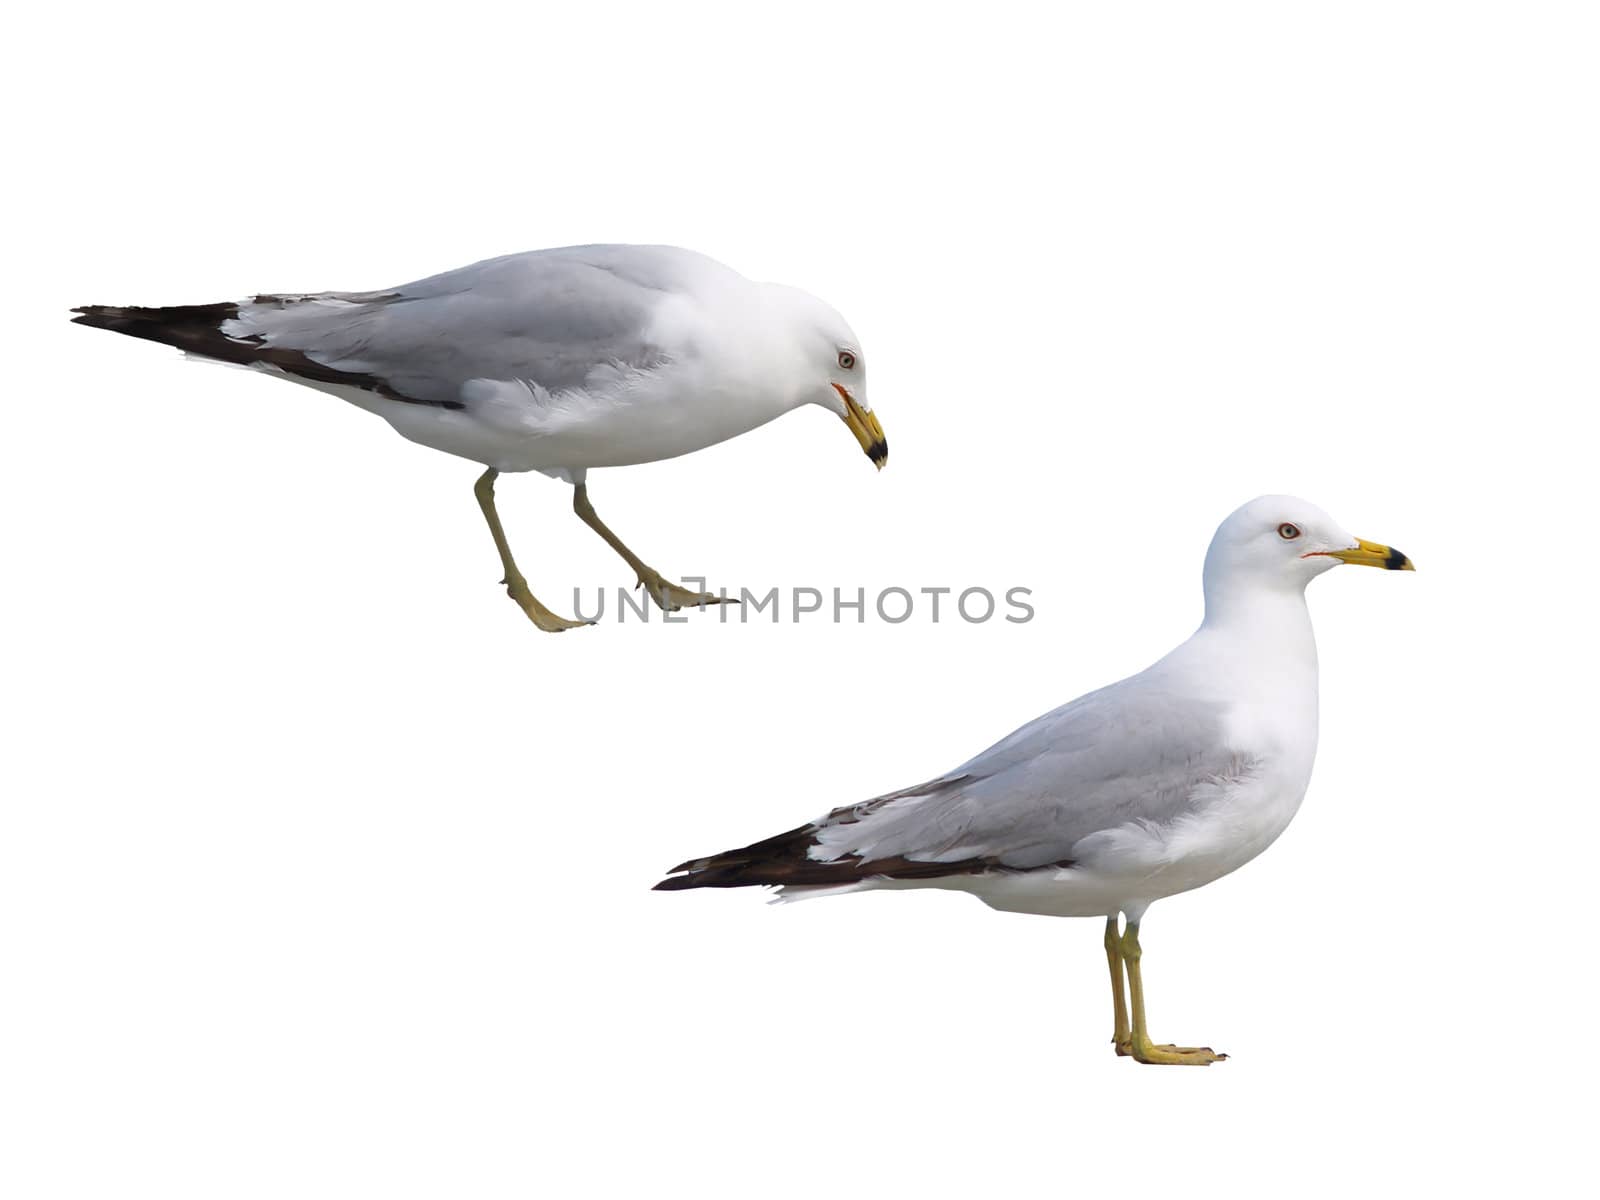 Two seagulls isolated on white, one standing and alert, the other looking down. The won't get upset when they're separated, as they're not particularly attached to each other.